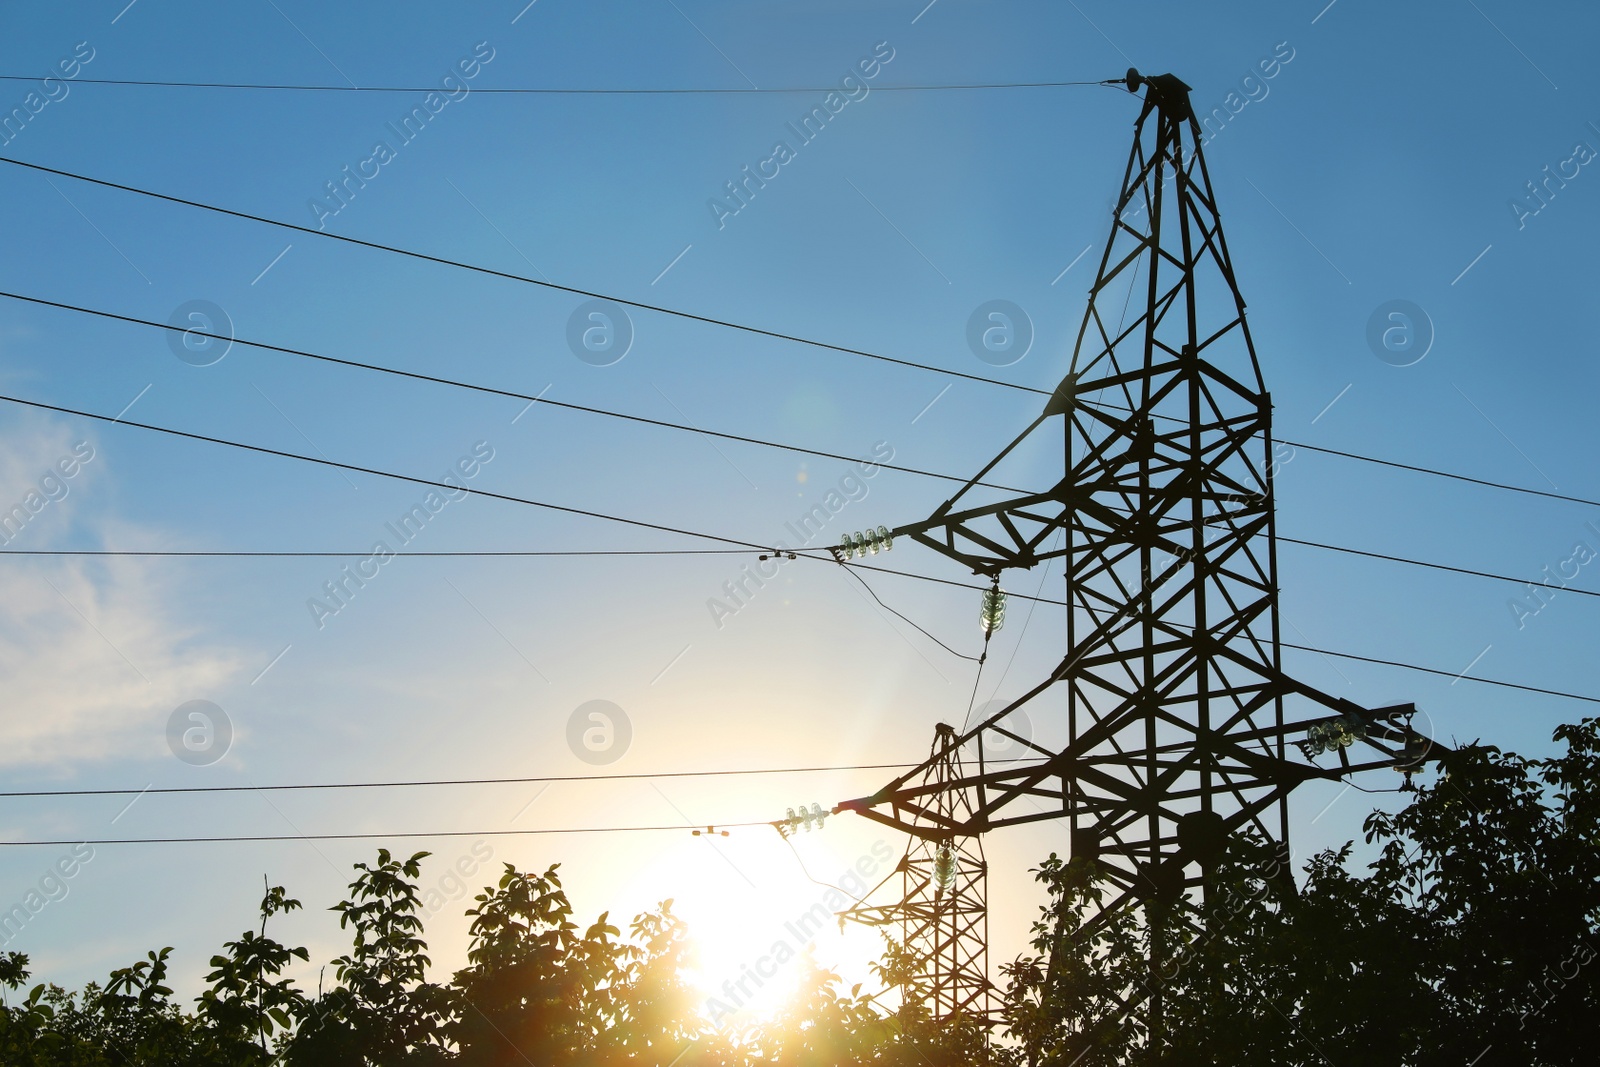 Photo of Silhouettes of high voltage tower and trees in evening